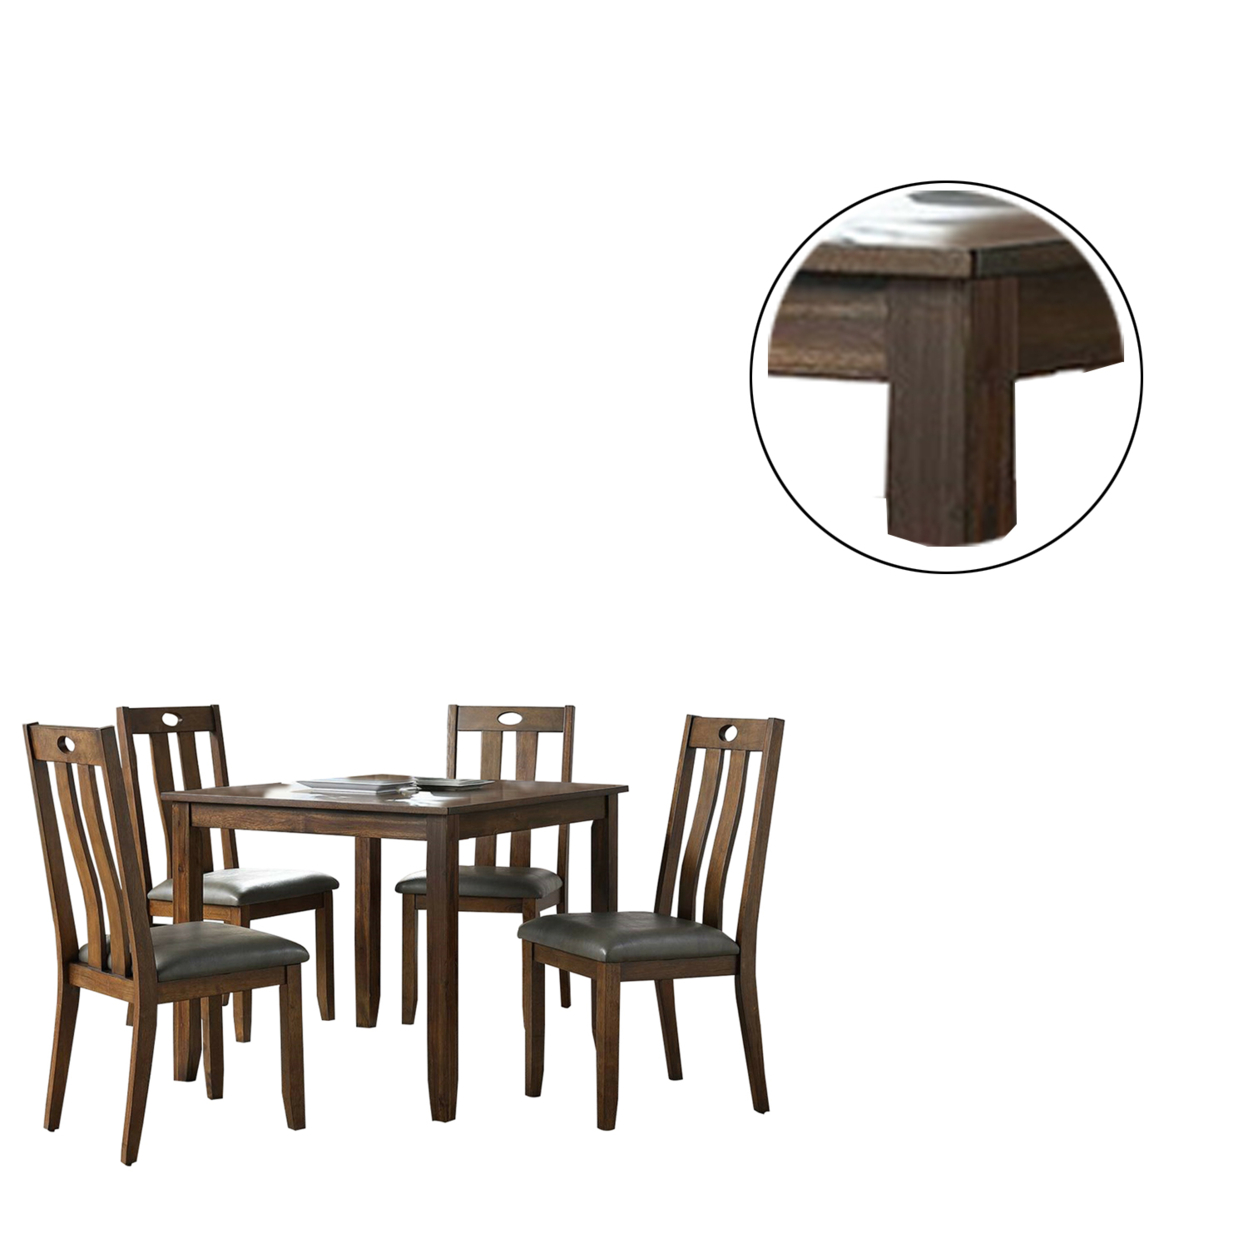 5 Piece Wooden Dining Set With Padded Seat Chair, Brown And Gray- Saltoro Sherpi